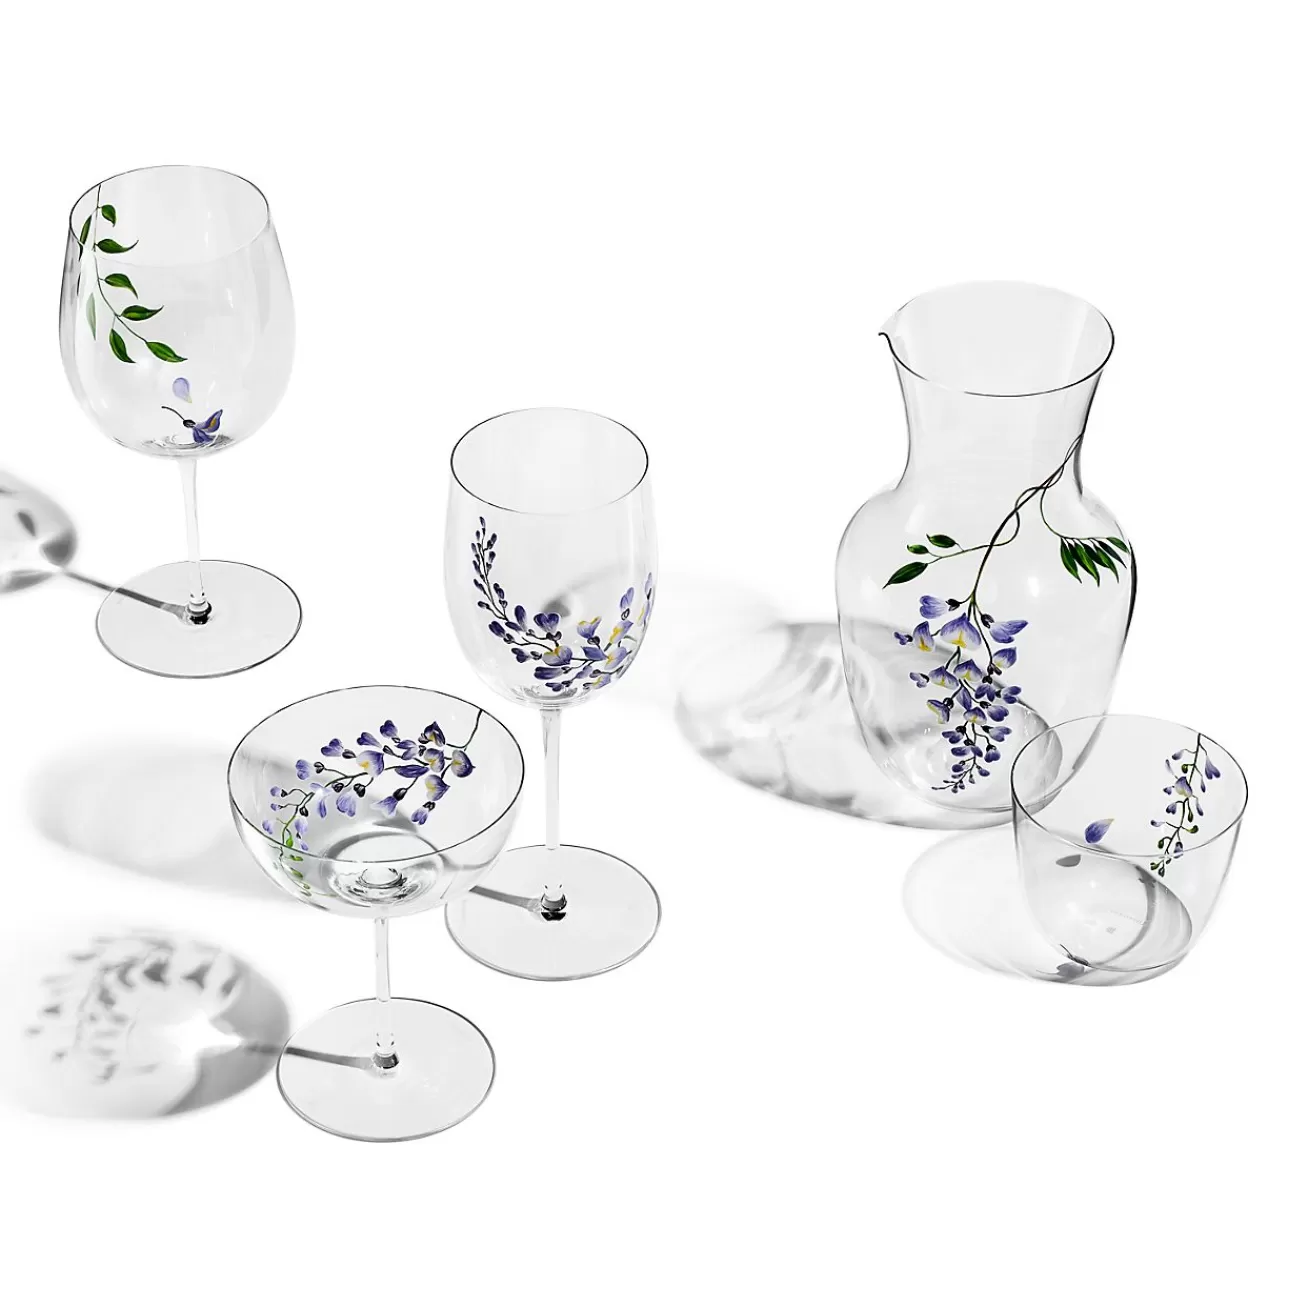 Tiffany & Co. Tiffany Wisteria Pitcher in Glass | ^ The Couple | Wedding Gifts